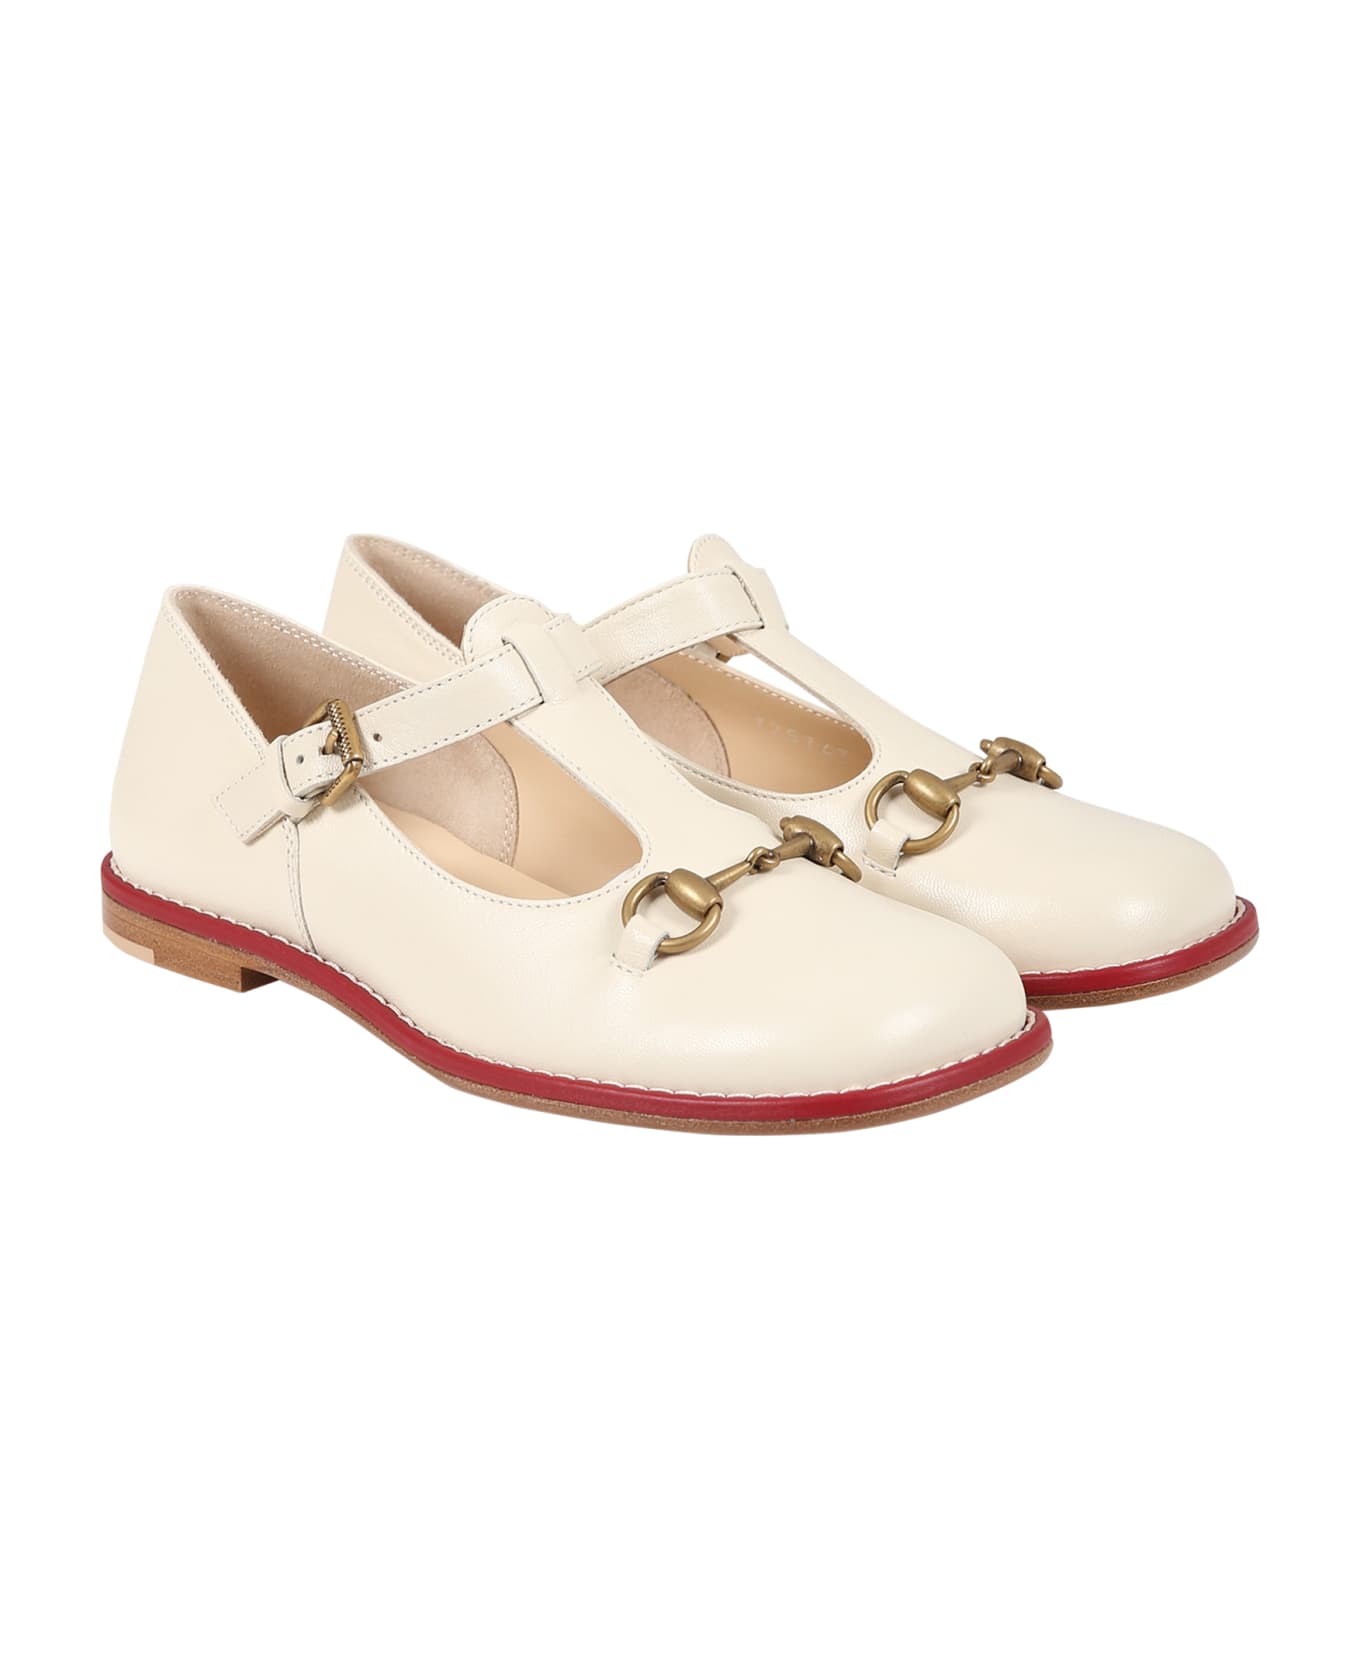 Gucci Ivory Ballet Flats For Girl With Iconic Horsebit - White